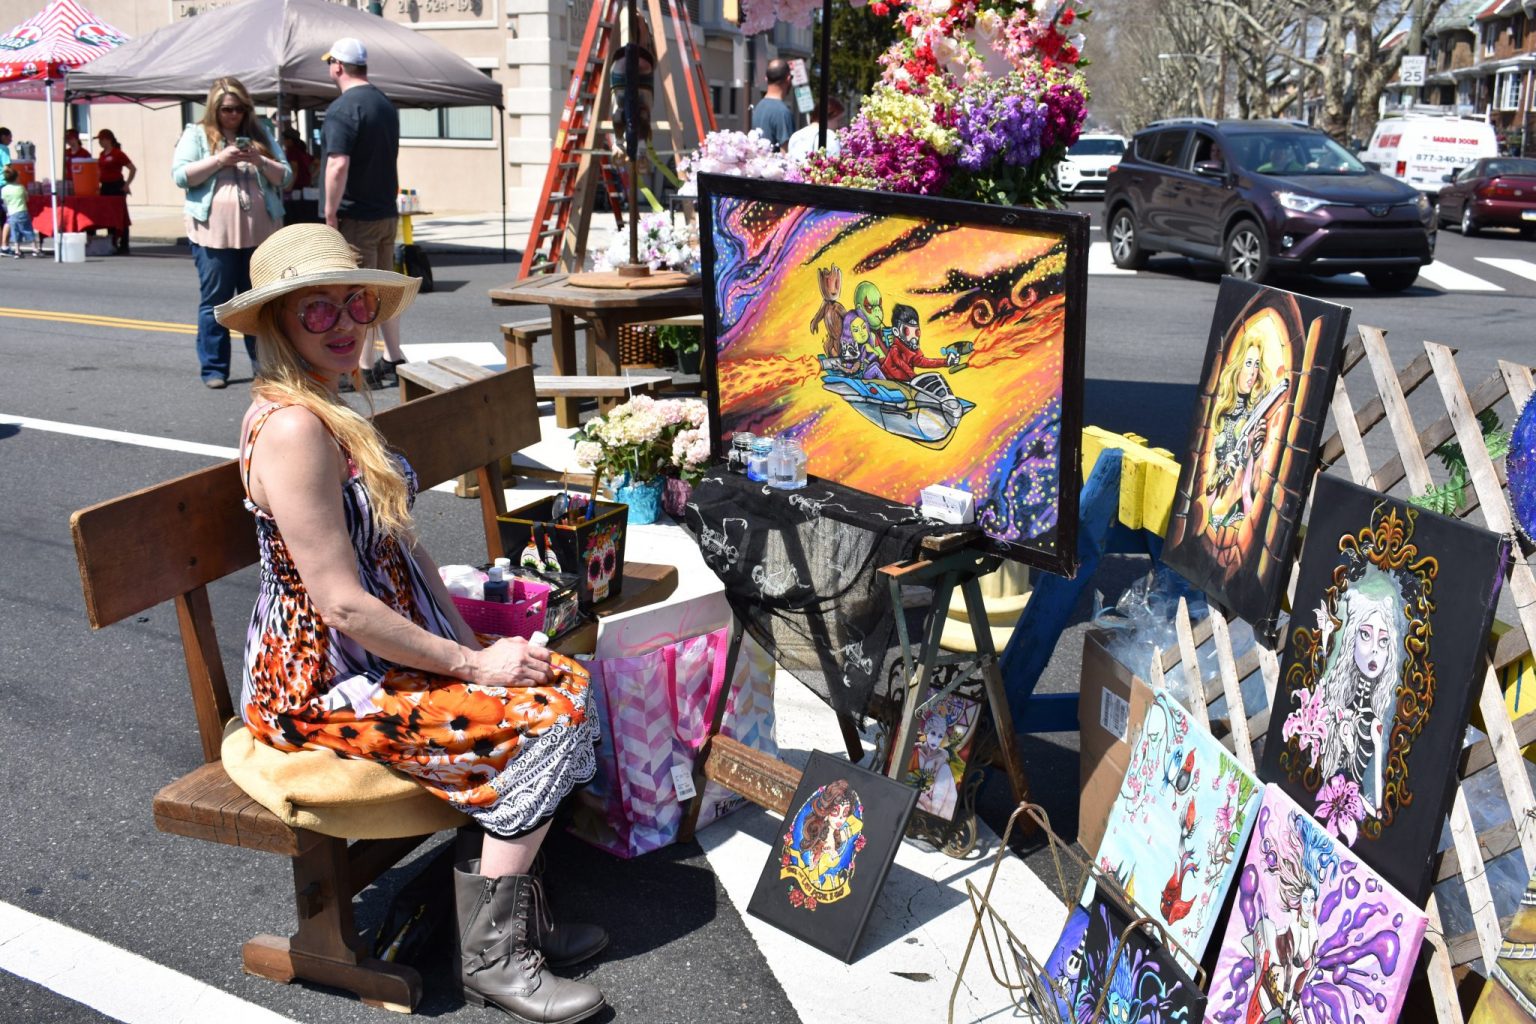 Mayfair arts festival on Saturday afternoon Northeast Times